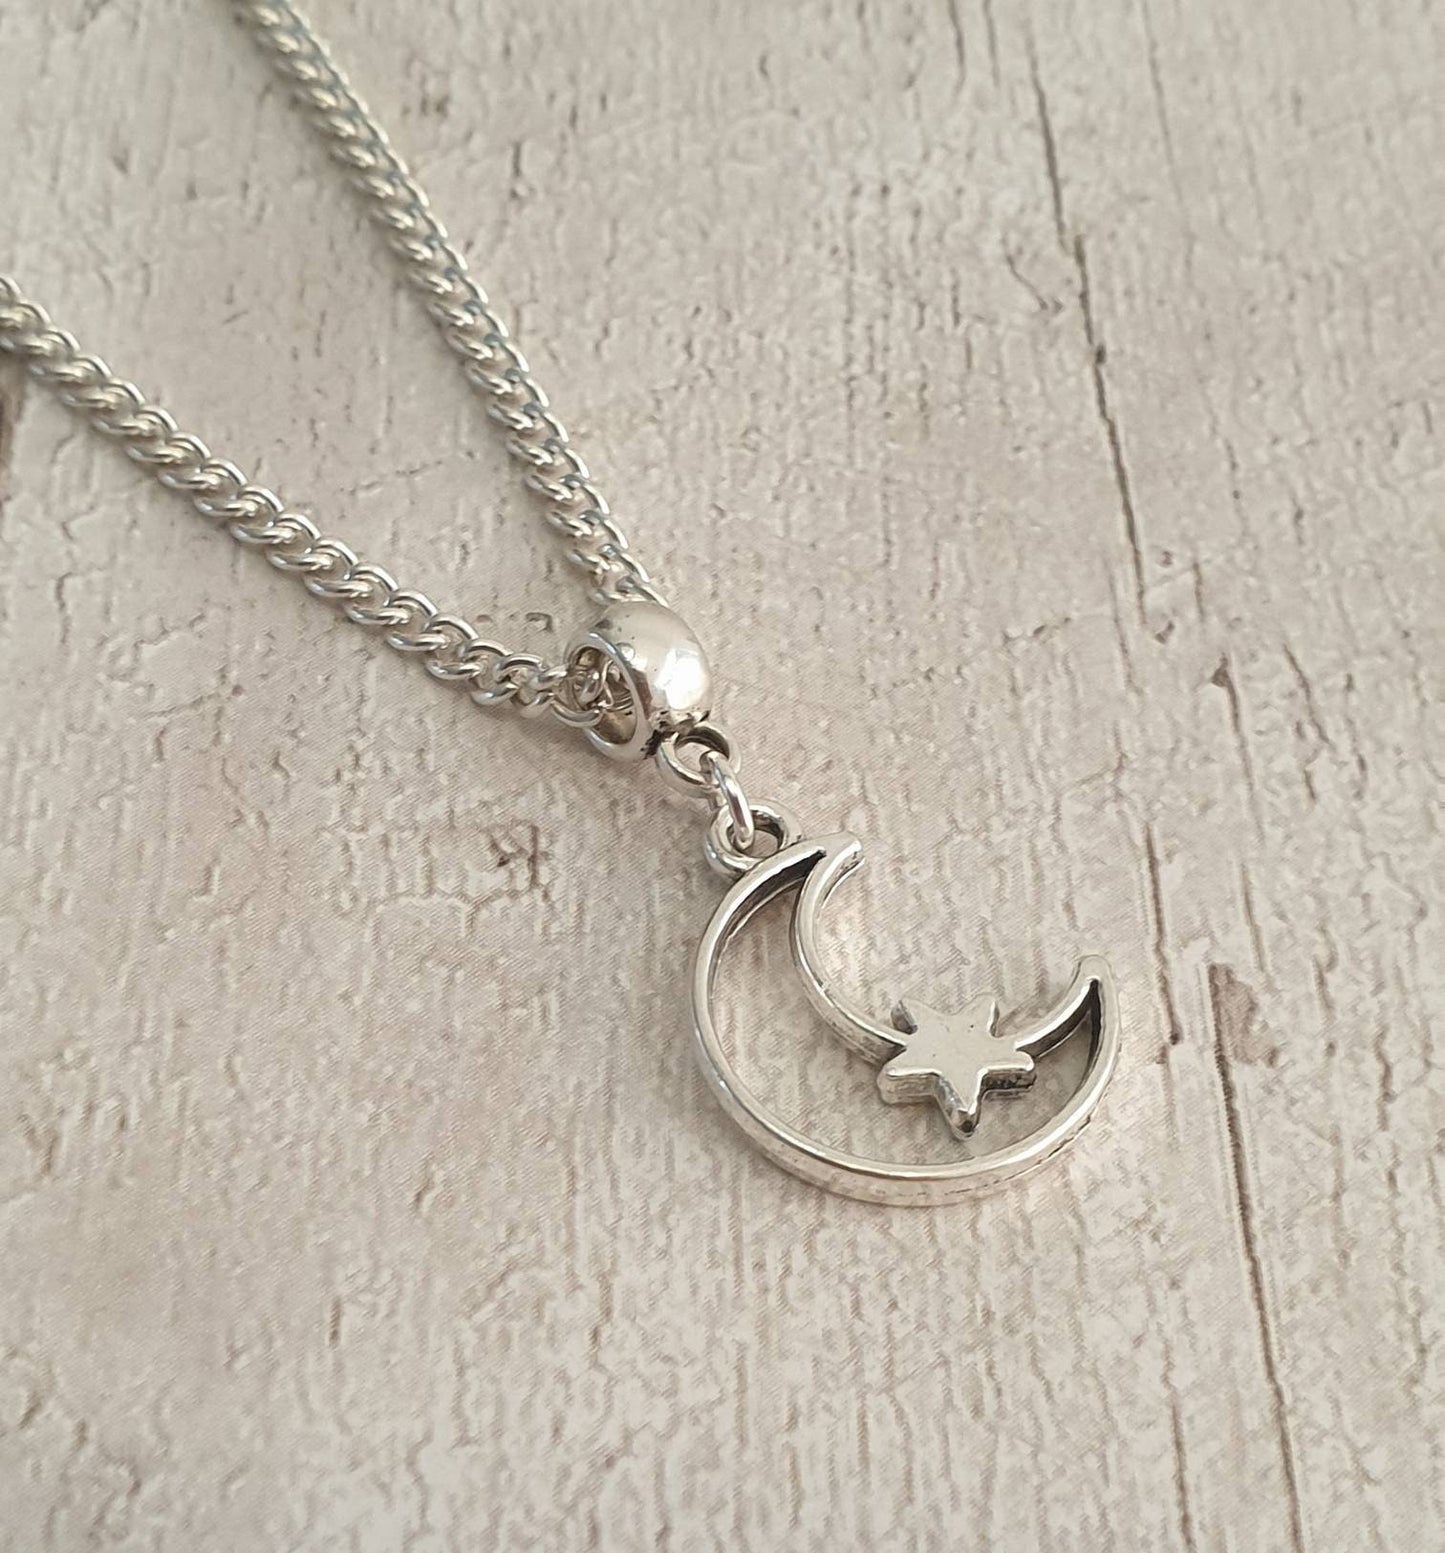 Handmade Antique Silver & Star Moon Charm Necklace Silver Plated Or Waxed Cord Variable Lengths, Gift Packaged - Premium  from Etsy - Just £5.49! Shop now at Uniquely Holt